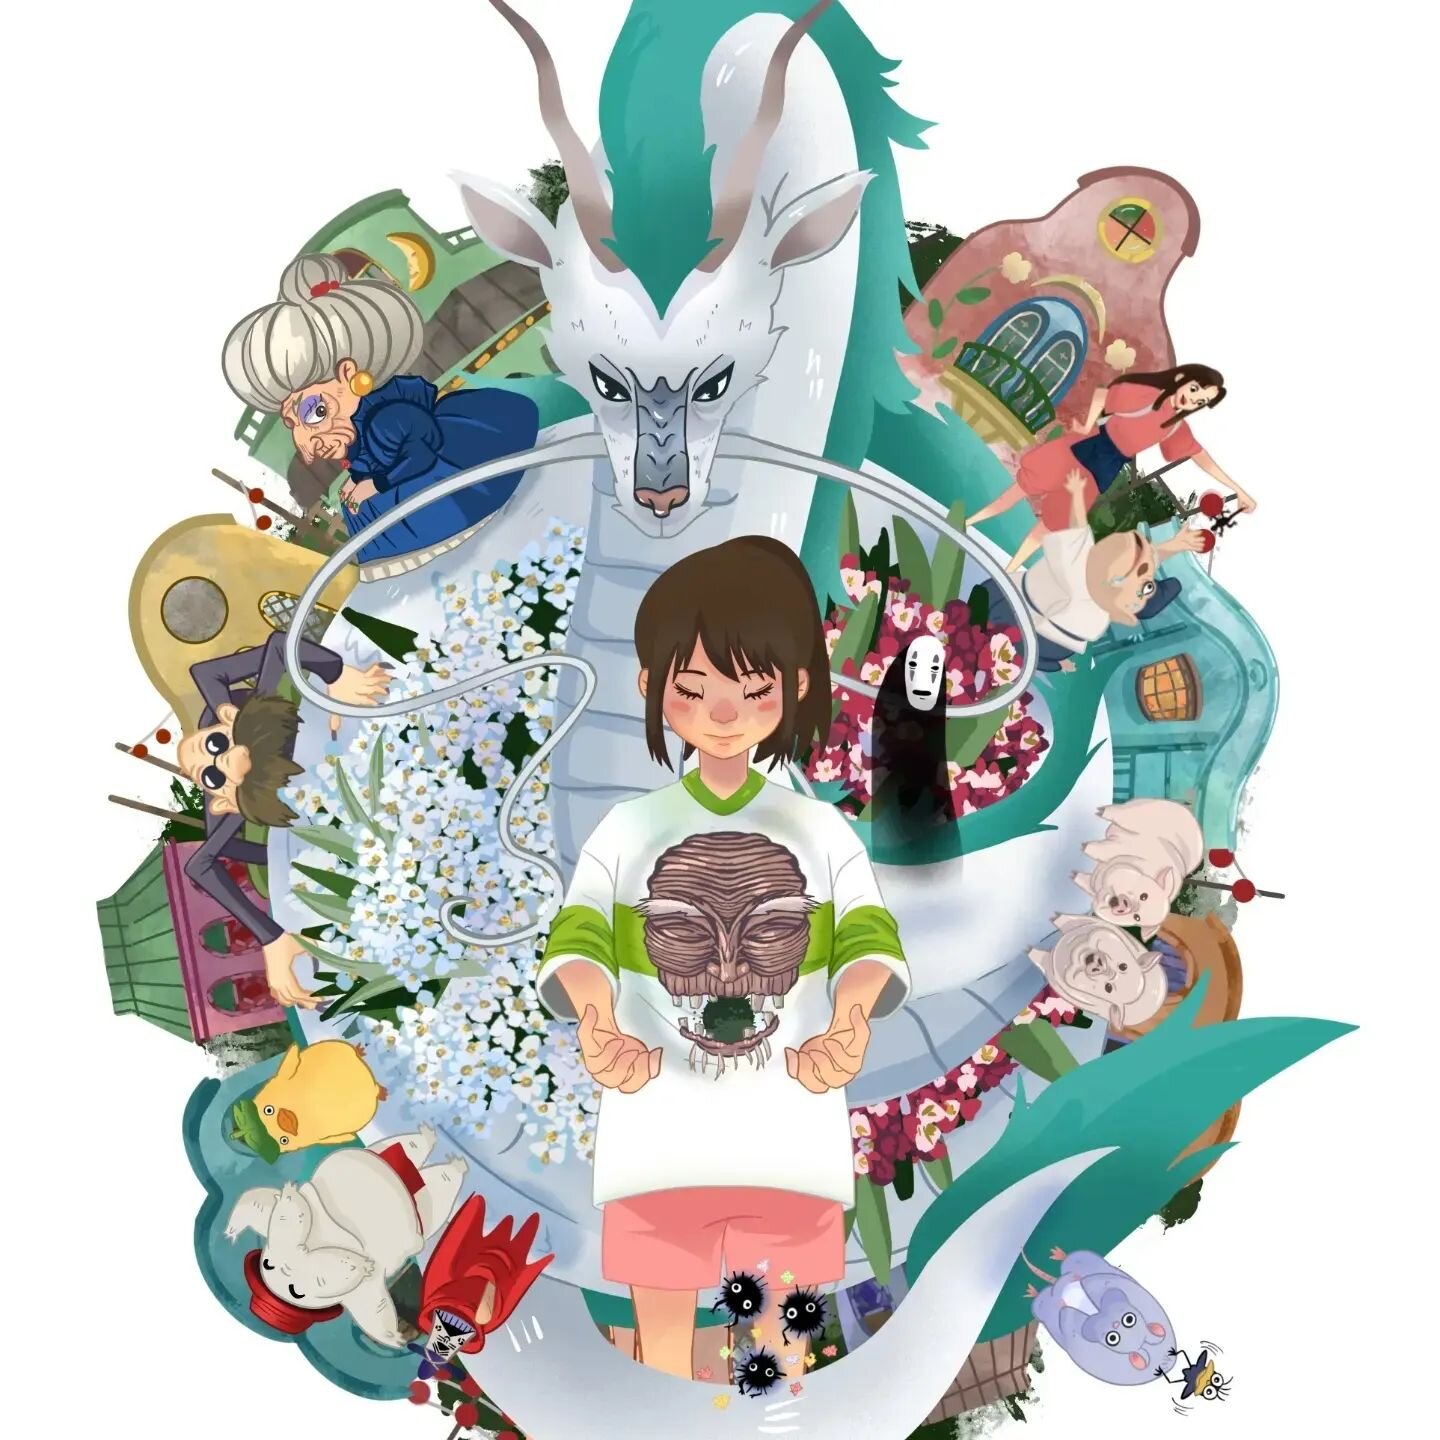 Spirited Away is one of my biggest inspirations, so I am excited to share this print with everyone soon. I have been working hard building my shop, please 🙏 be patient with me and I will update you all as often as I can!
.
.
.
.
#spiritedaway #insta